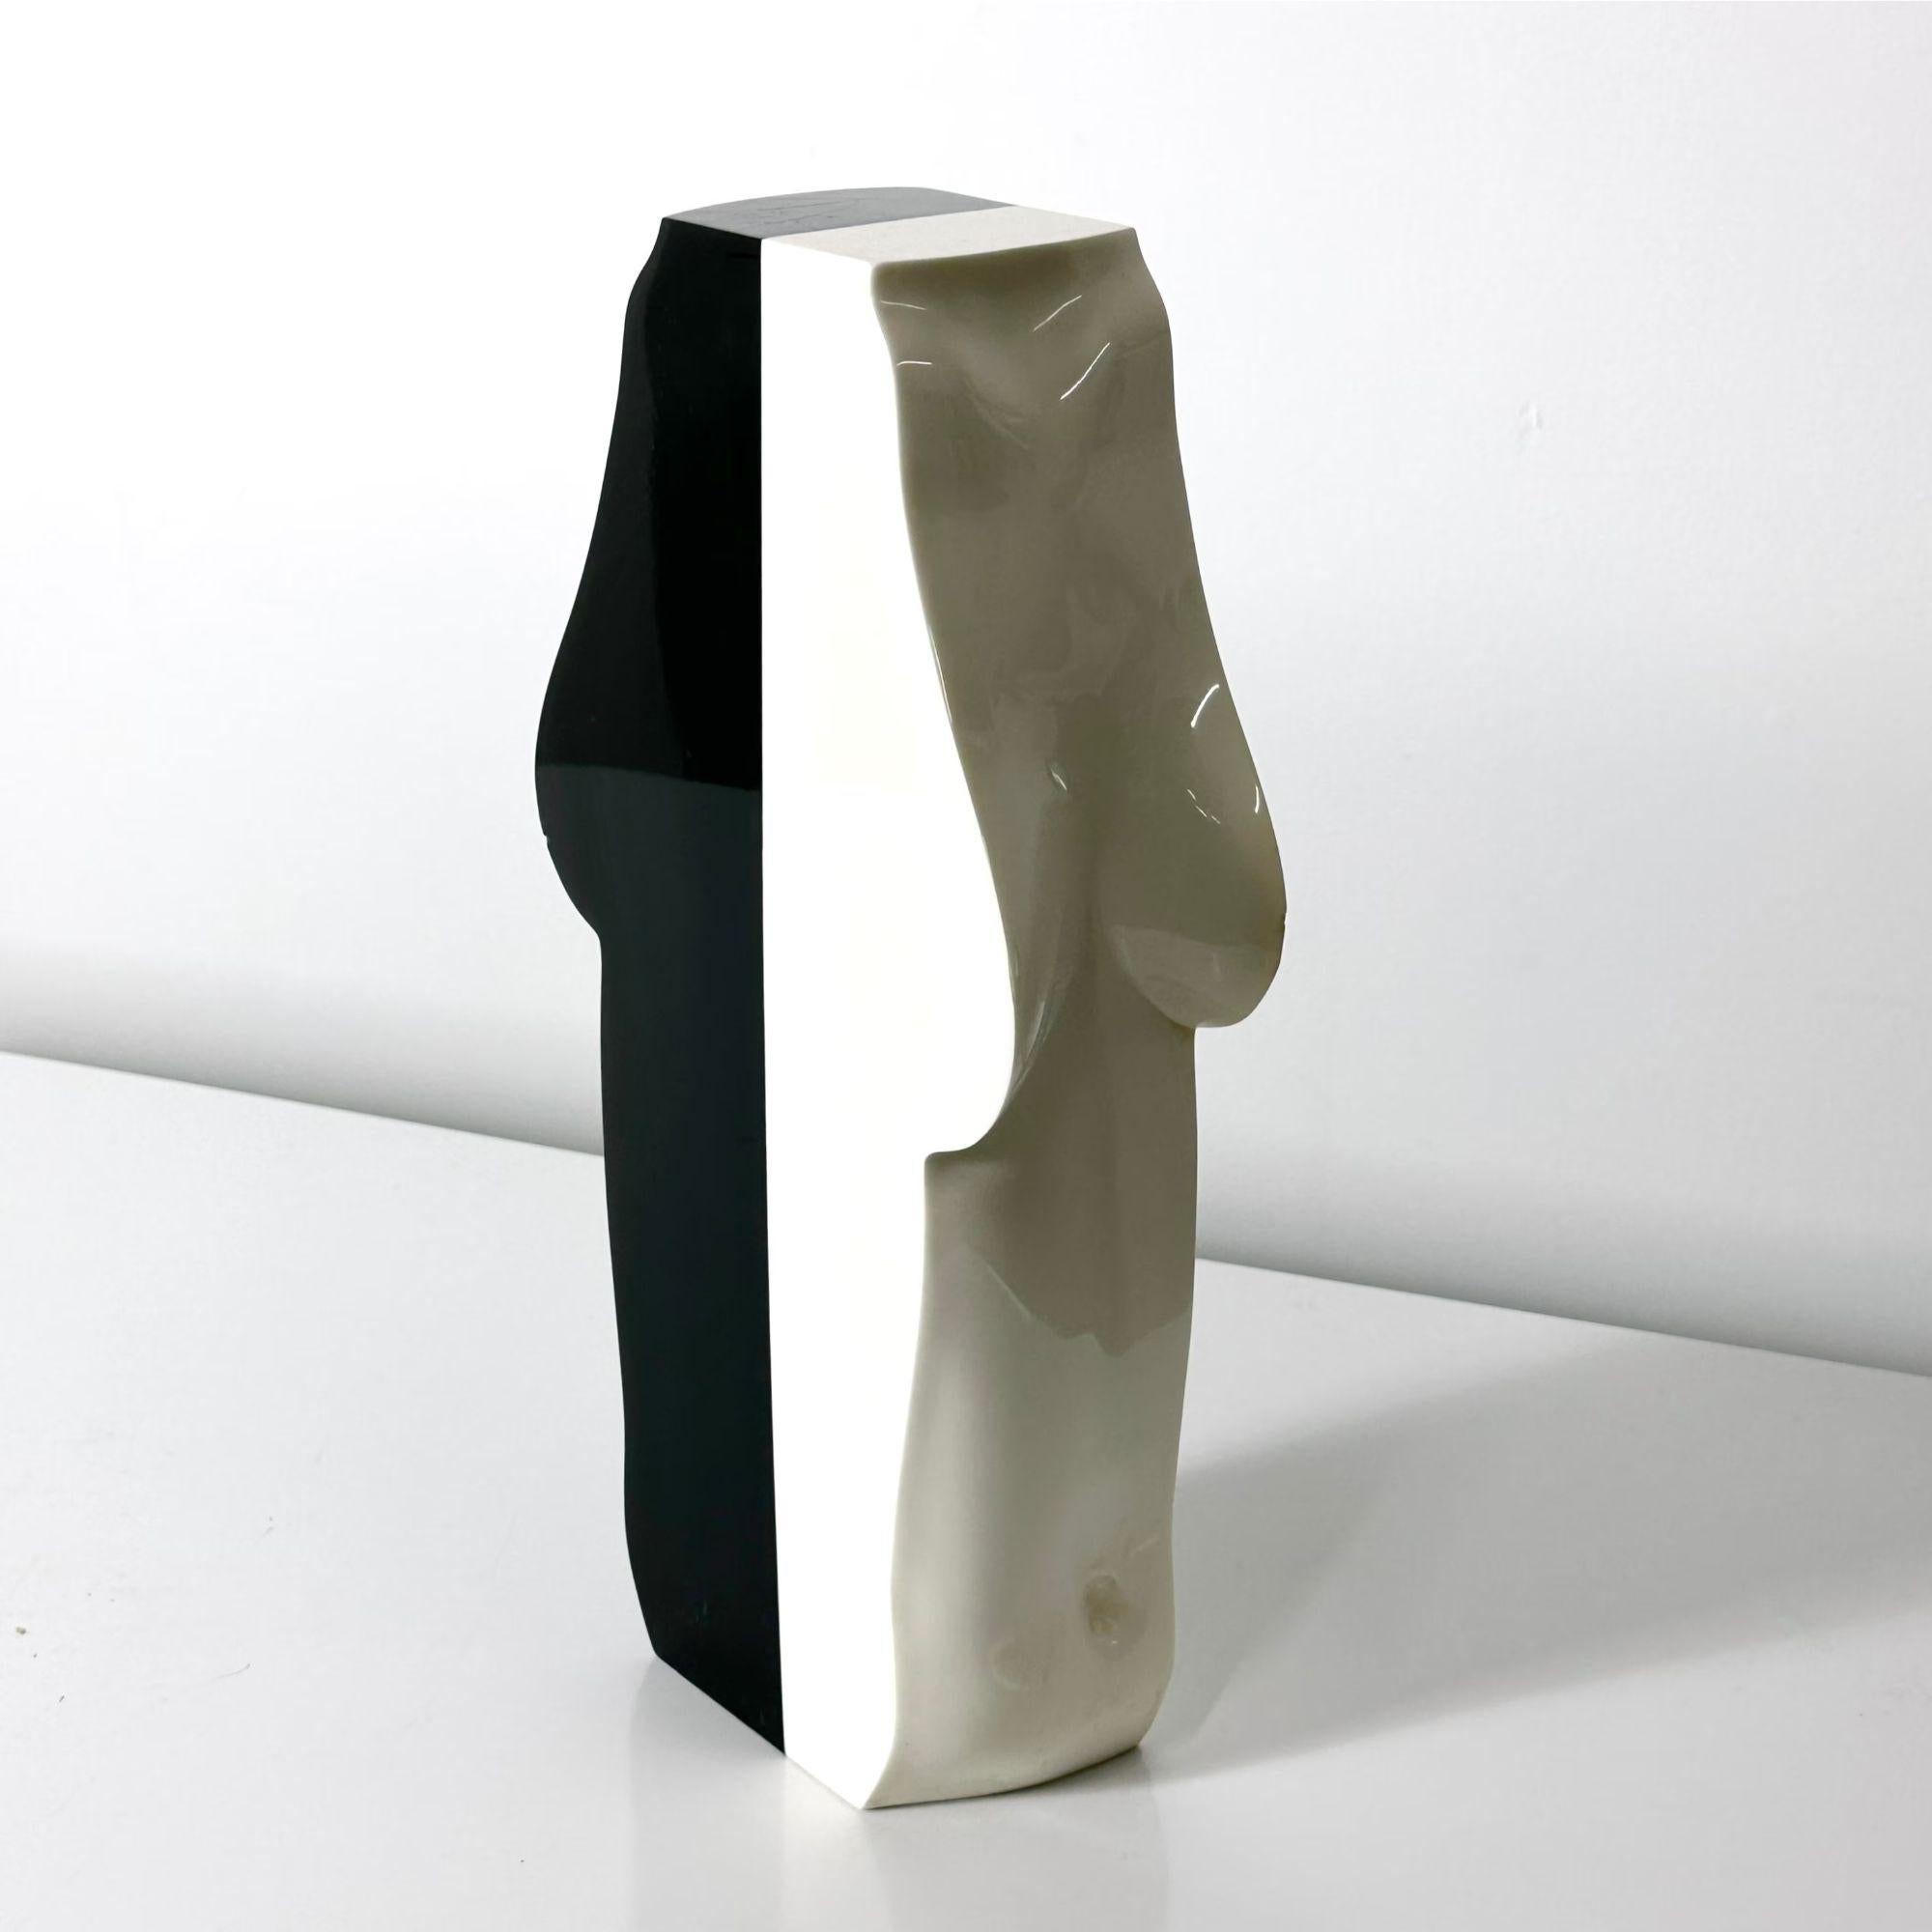 Vintage Richard Pepitone Mid Century Modern Nude Acrylic Sculpture 

Pop art resin sculpture by Richard Pepitone 1972
Black and white nude female sides conjoin to form a phallic profile
Signed and dated

Additional Information:
Materials: